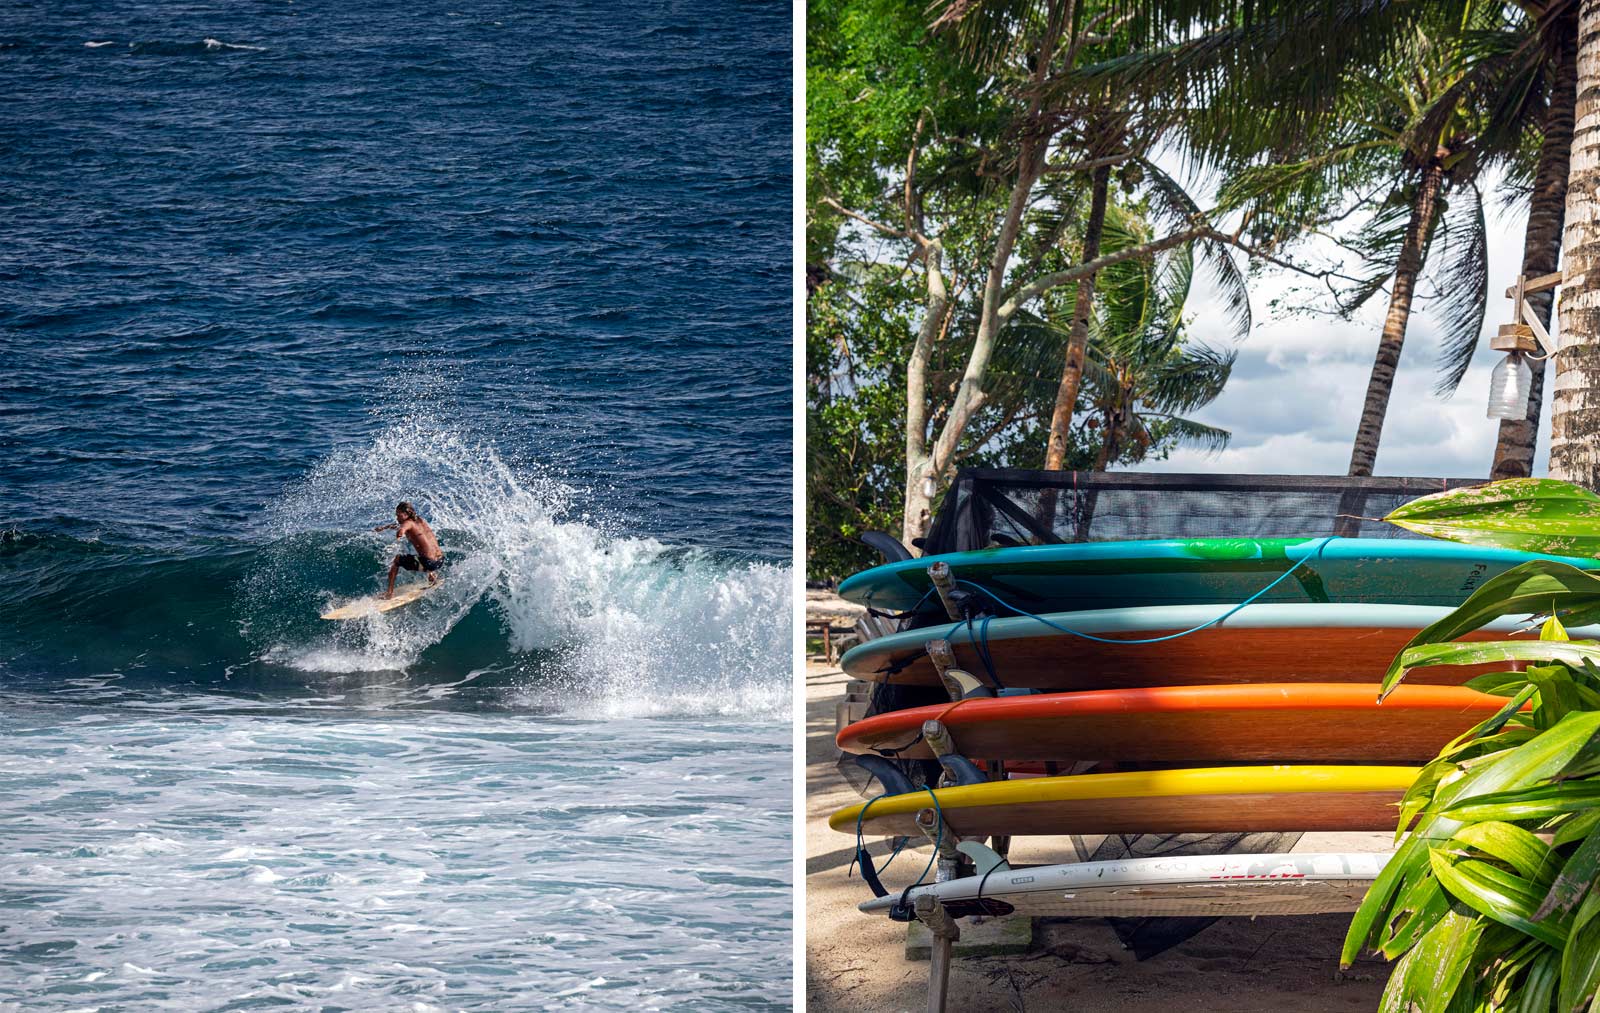 Surfing in Siargao